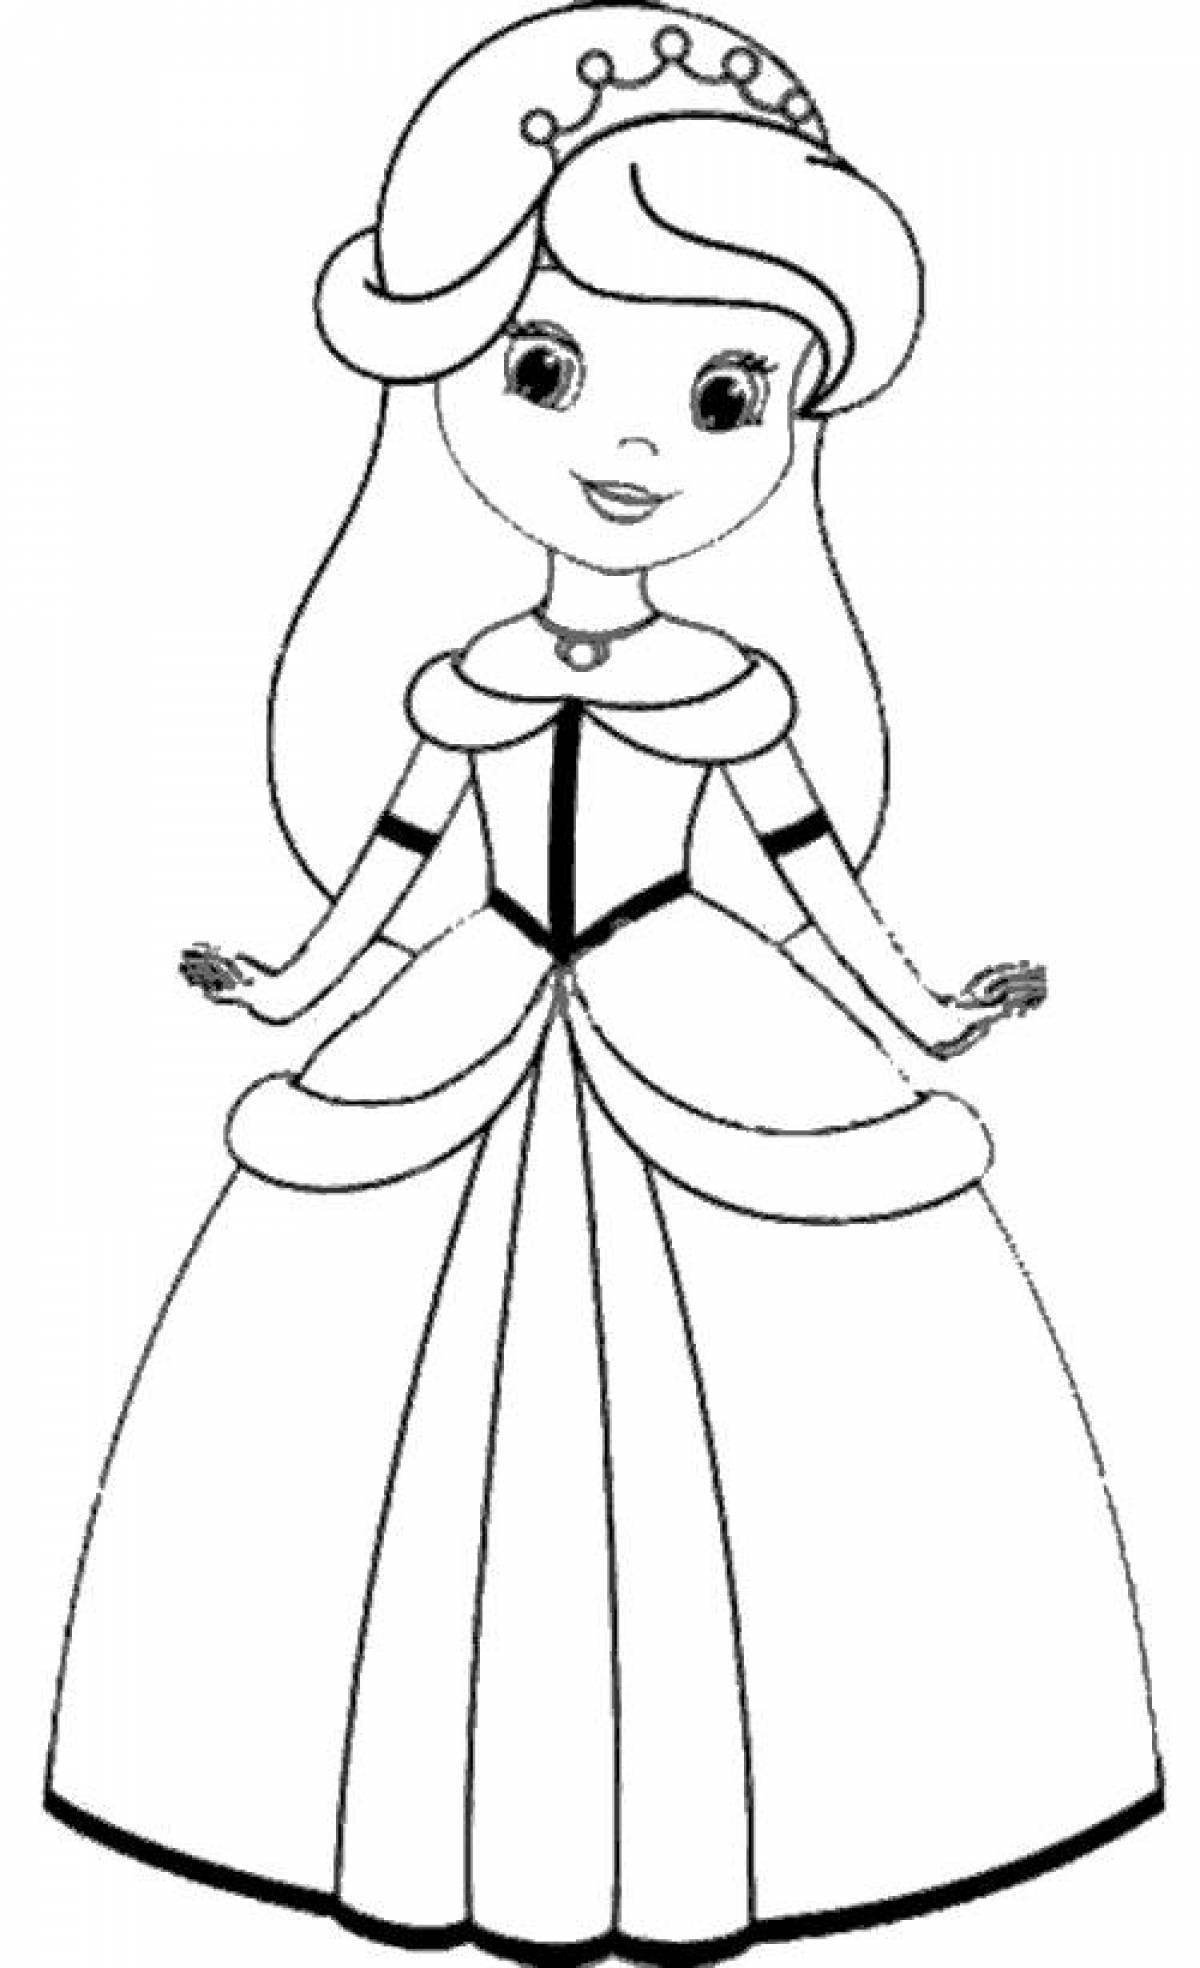 Cute princess coloring book for kids 3-4 years old